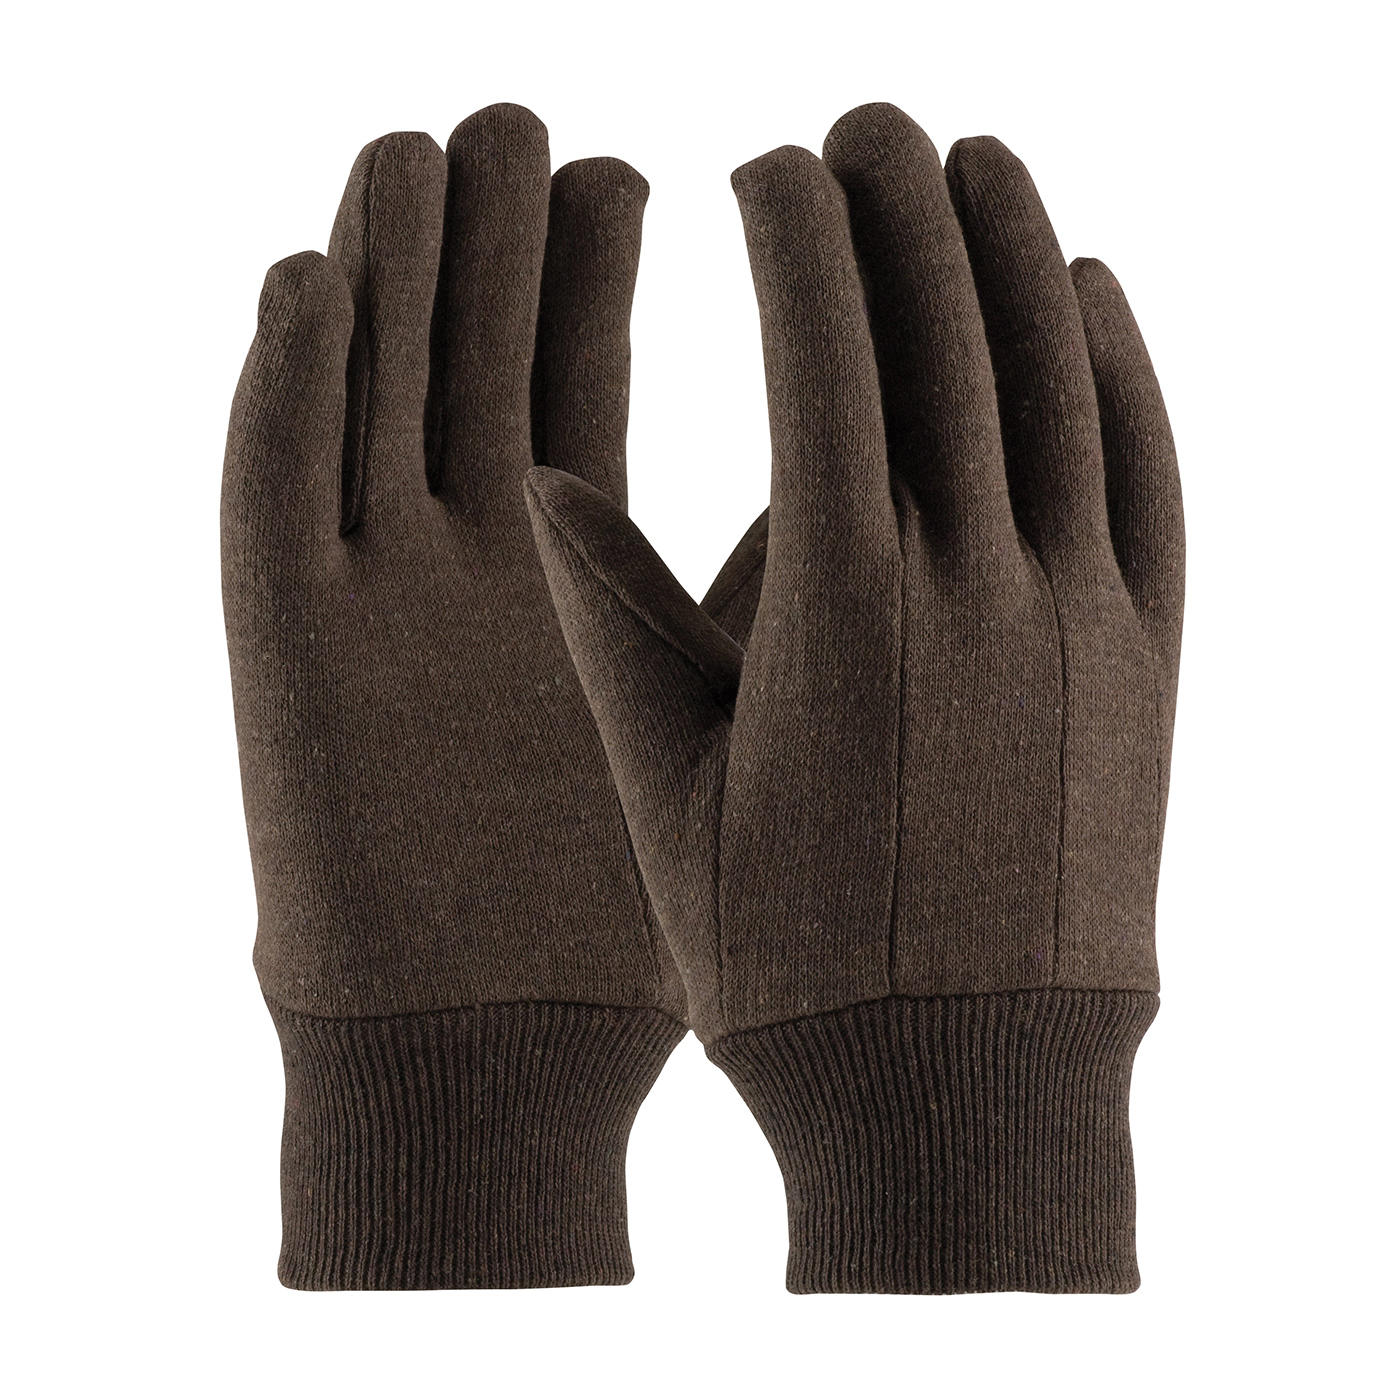 PIP® 95-806C Economy Weight Ladies General Purpose Gloves, Fabric/Work, Clute Cut/Full Finger/Straight Thumb Style, Cotton/Polyester Palm, Cotton/Jersey/Polyester, Brown, Knit Wrist Cuff, Uncoated Coating, Cotton/Polyester Lining